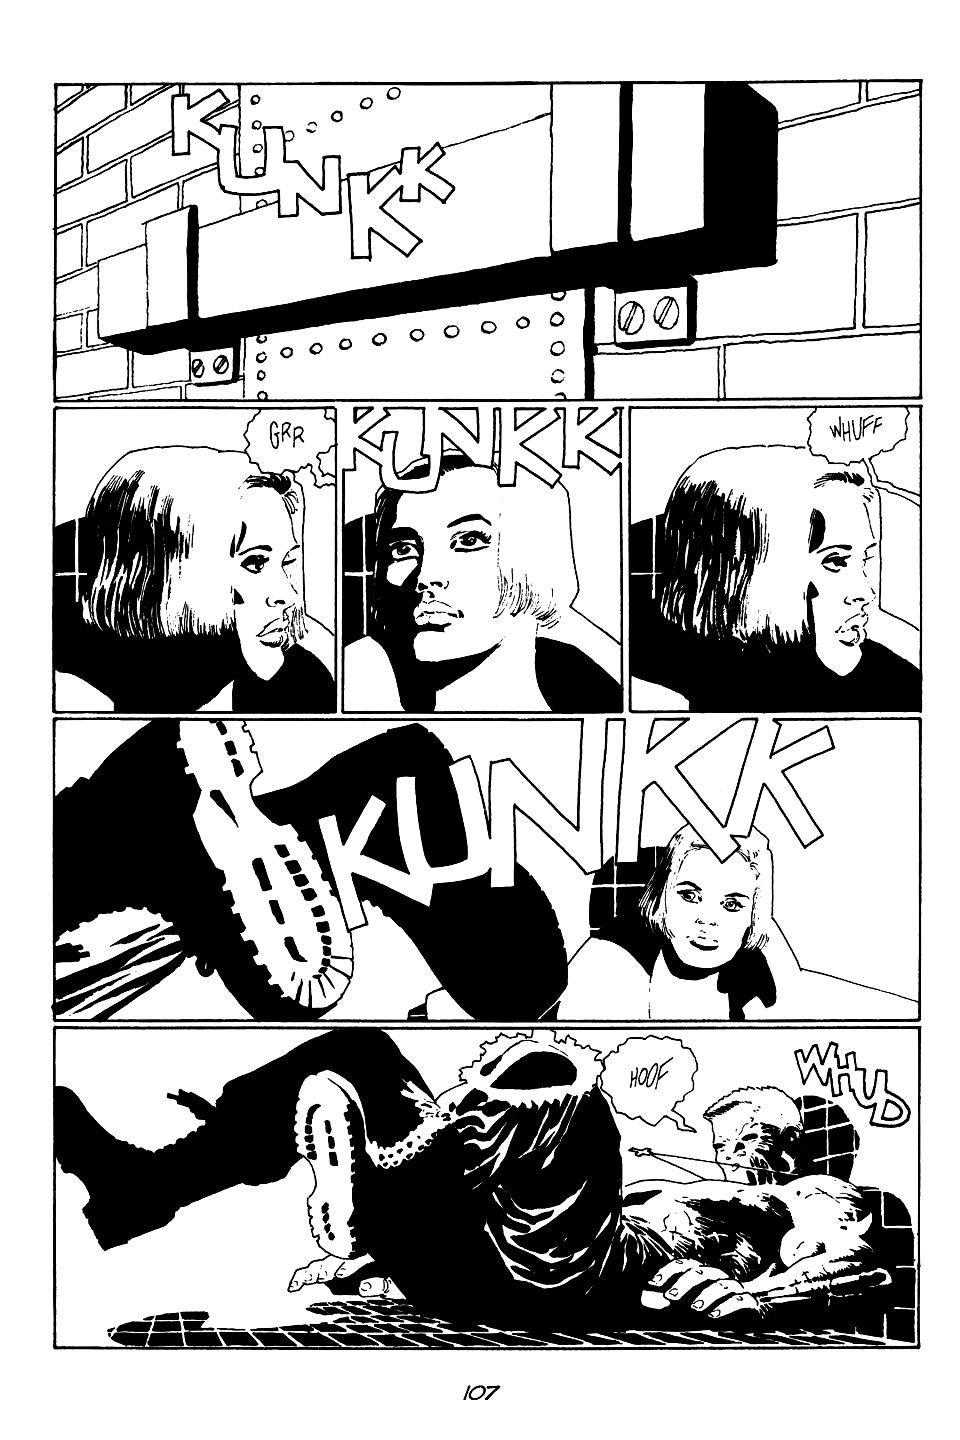 page 107 of sin city 1 the hard goodbye